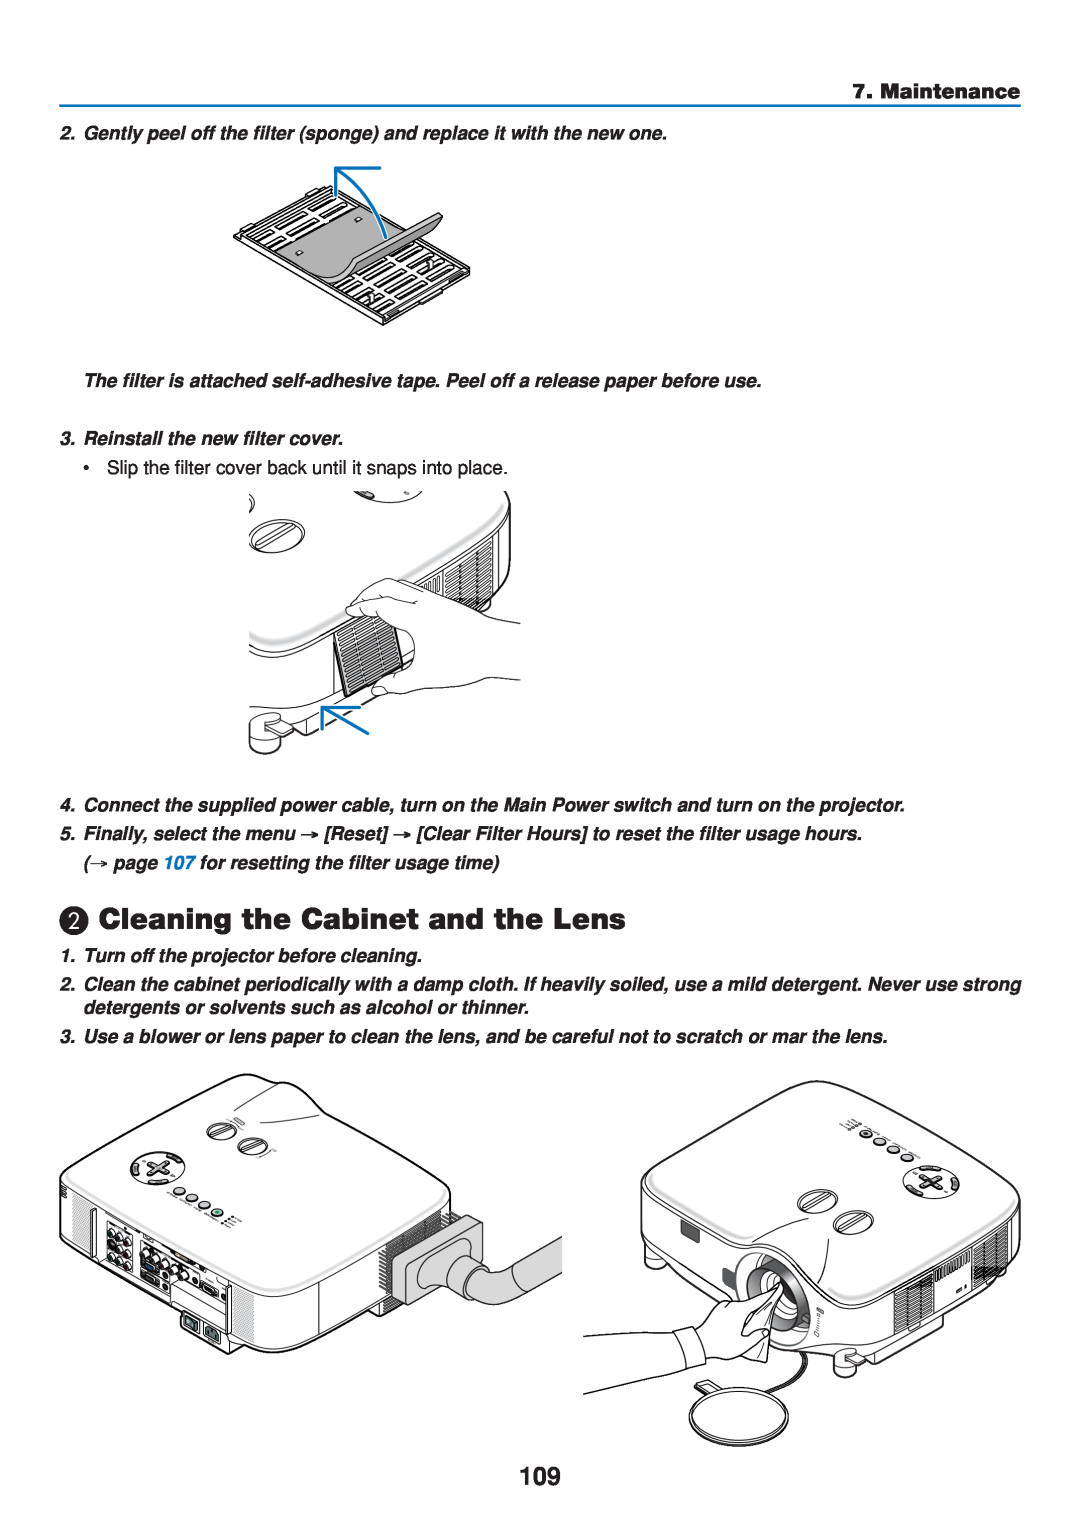 Dukane 8808 user manual Cleaning the Cabinet and the Lens, Maintenance 